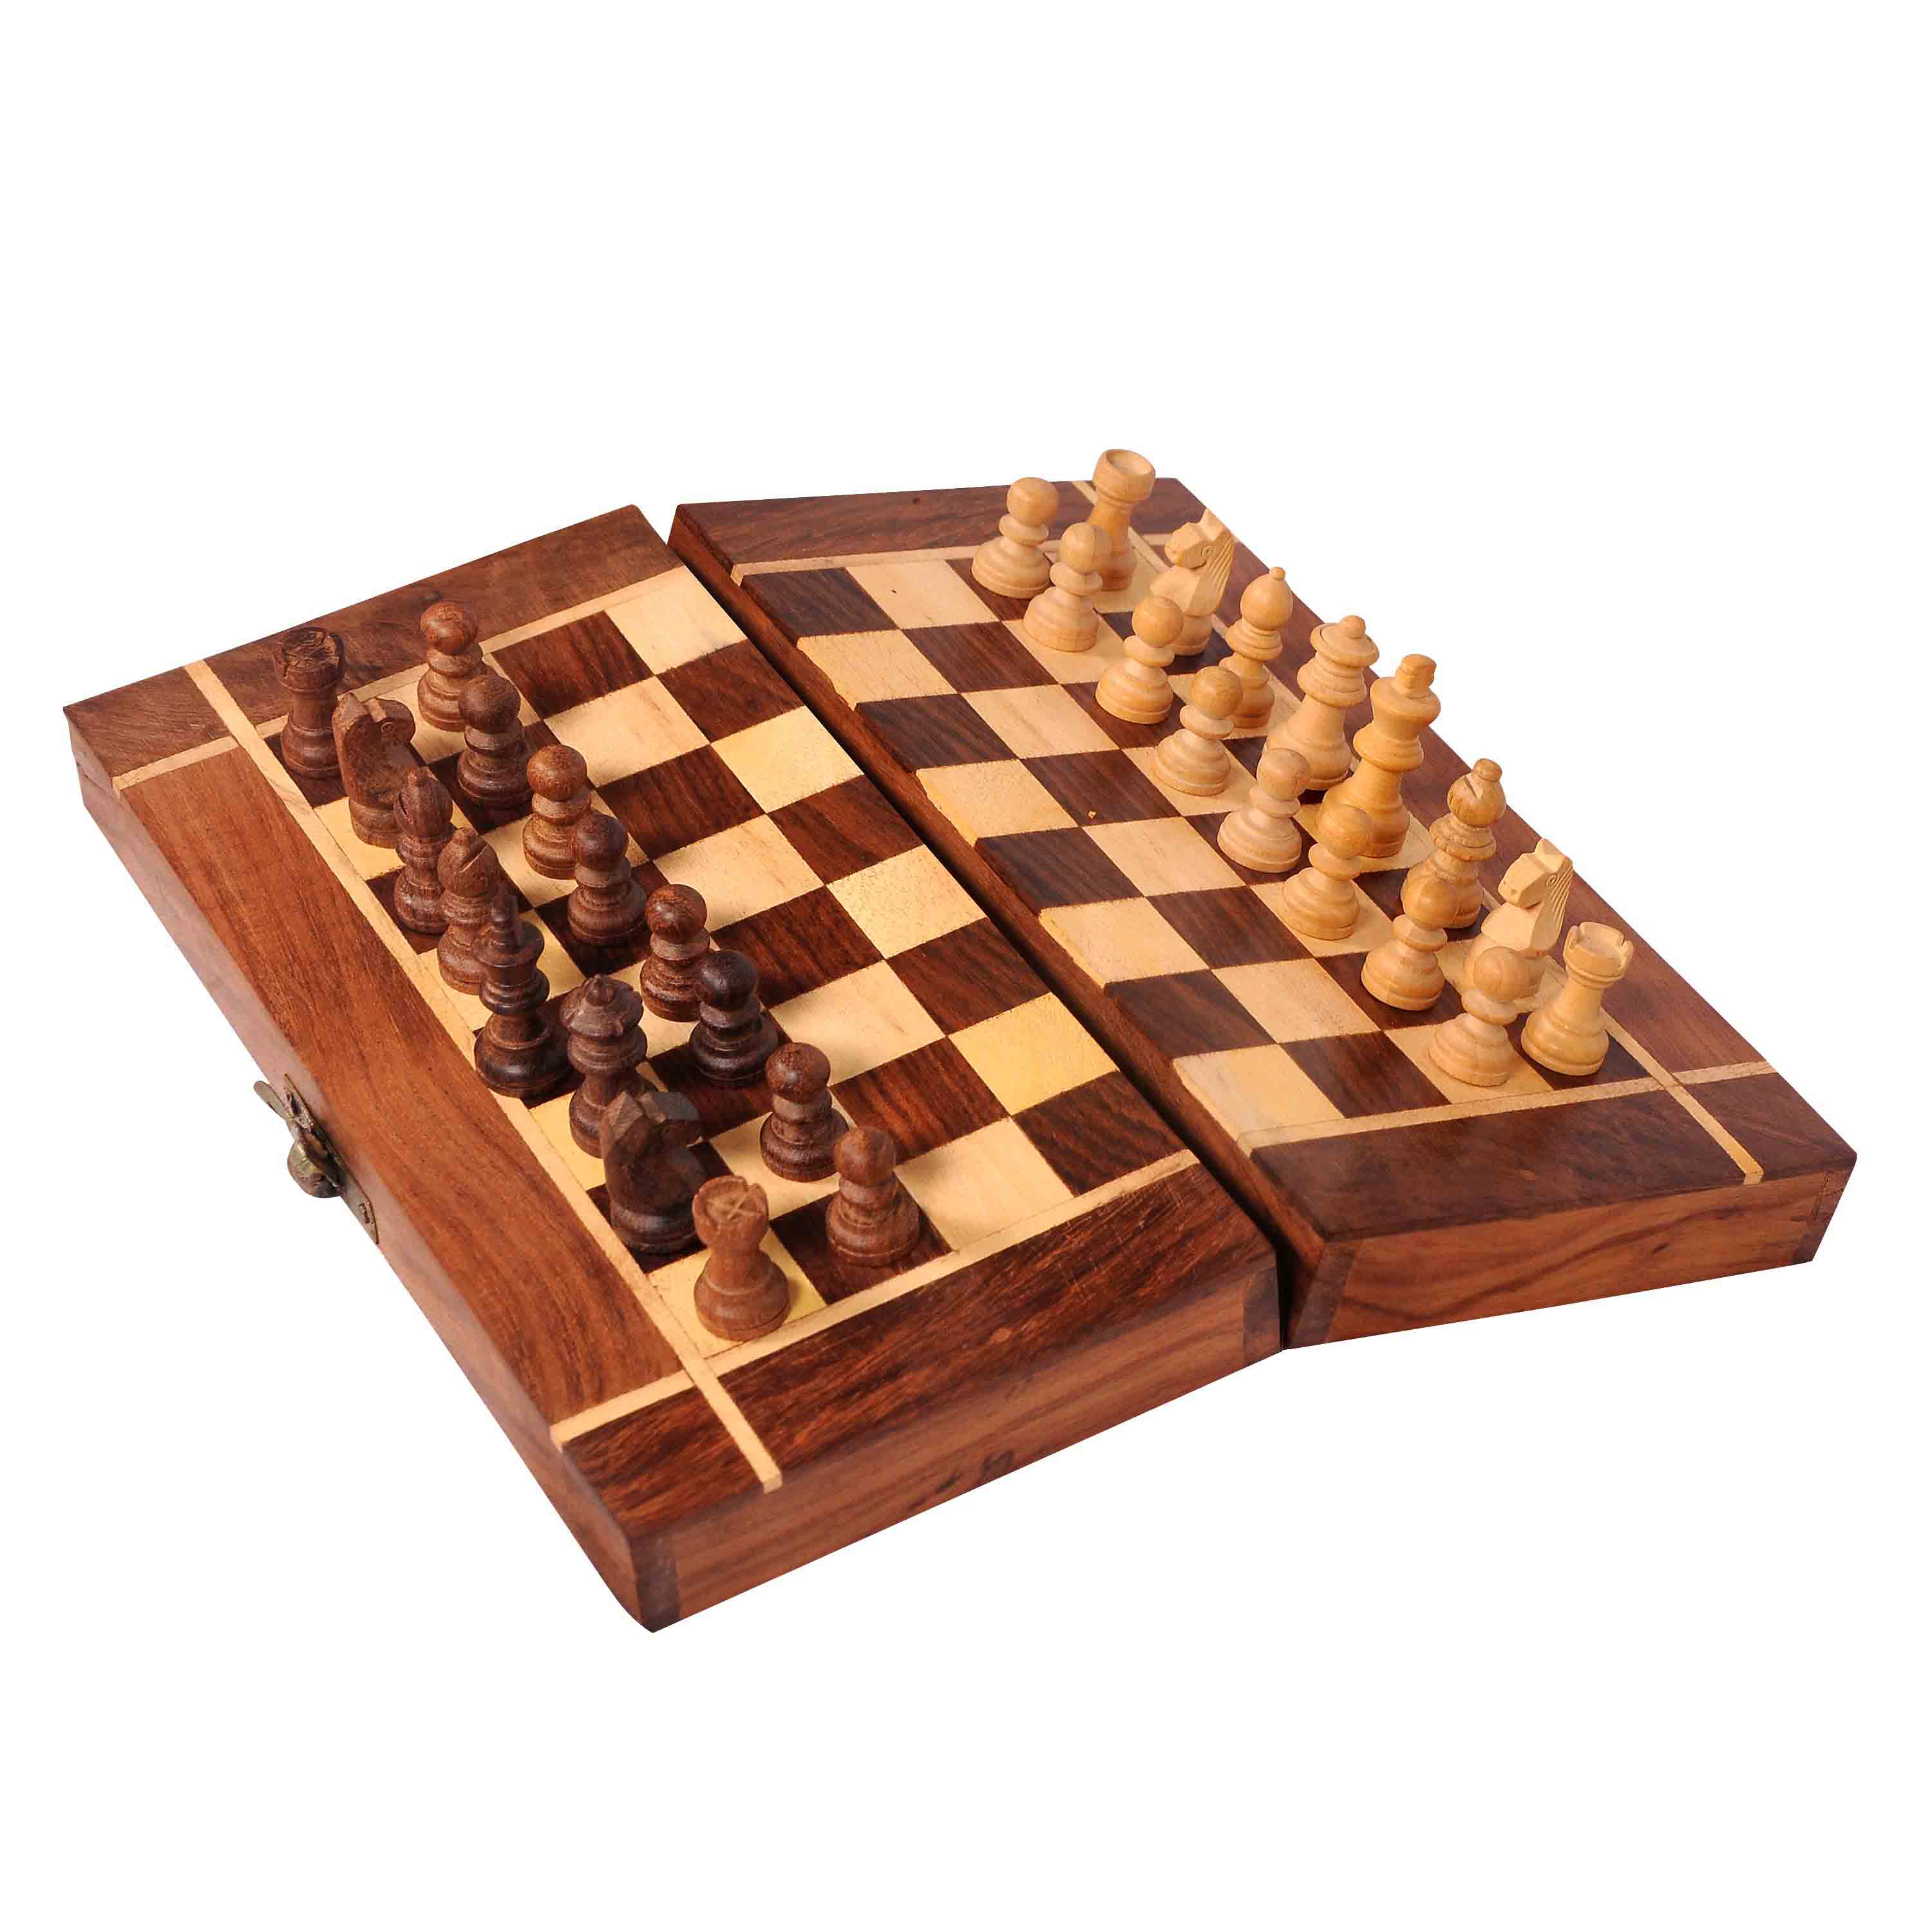 Magnetic Folding Chess Board